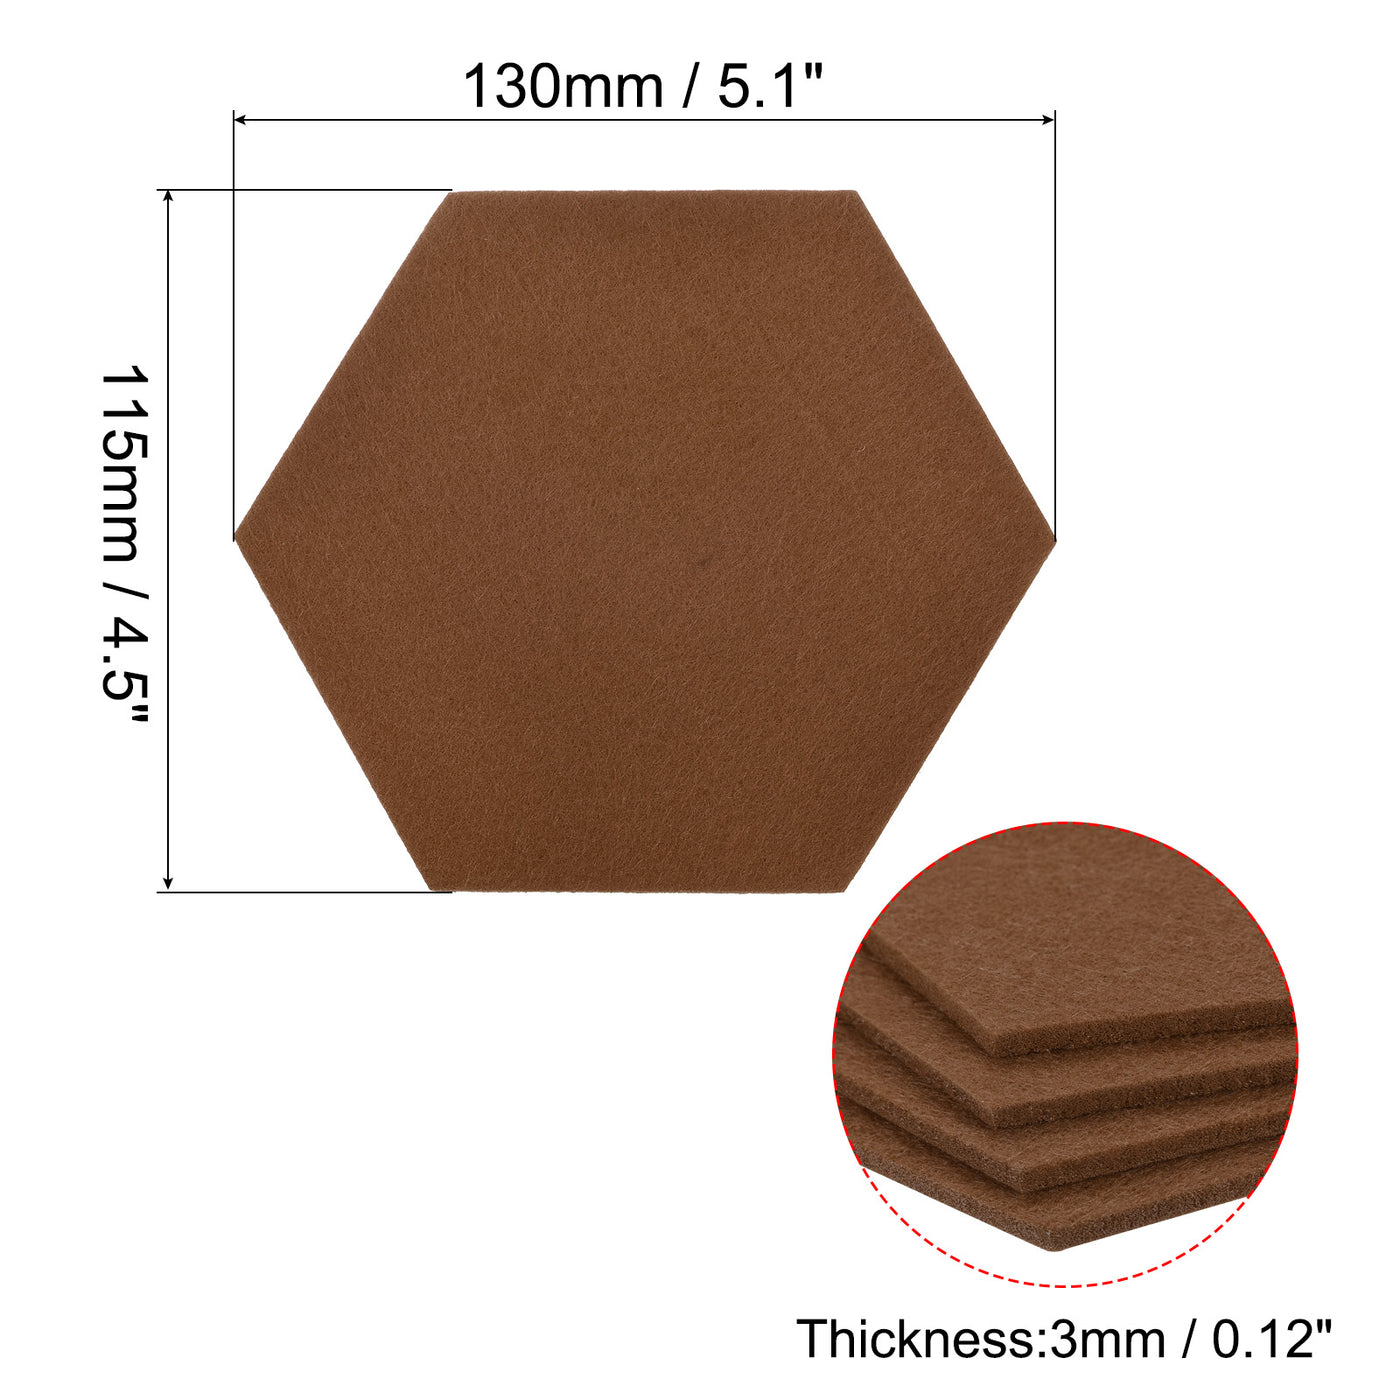 uxcell Uxcell Felt Coasters 9pcs Absorbent Pad Coaster for Drink Cup Pot Bowl Vase Brown